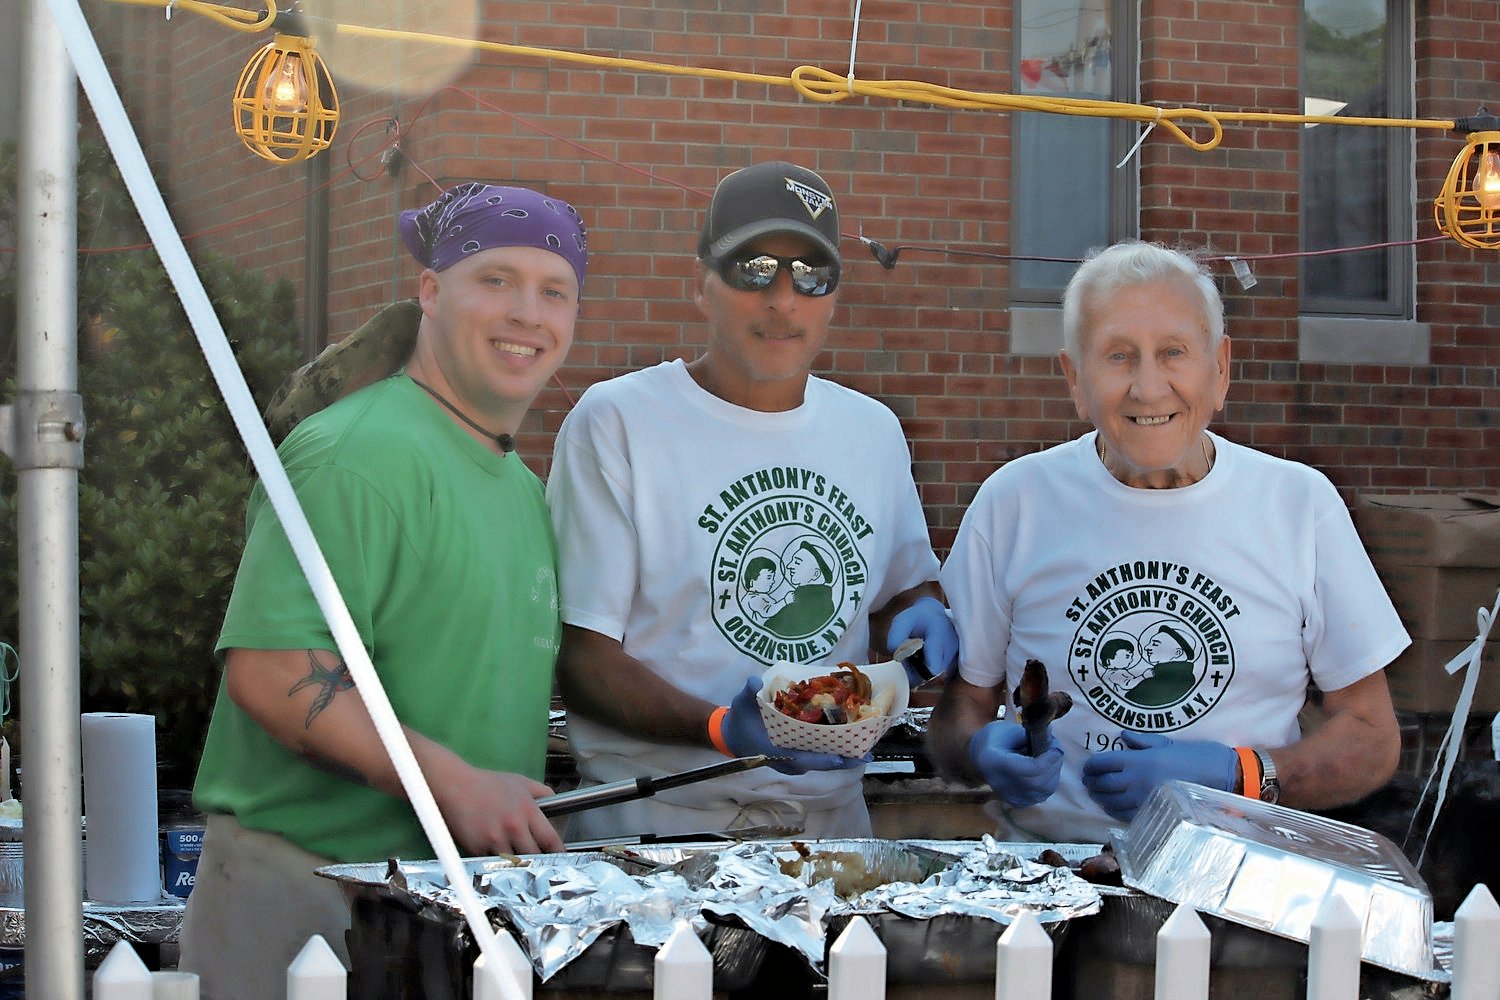 Volunteer Tony Ditizio, far right, started it all 50 years ago when St. Anthony’s Church hosted its first feast. He was joined by his godson, Dominic Albanese and Rich Giambrone at last year’s feast and is now preparing for the 50th in June.